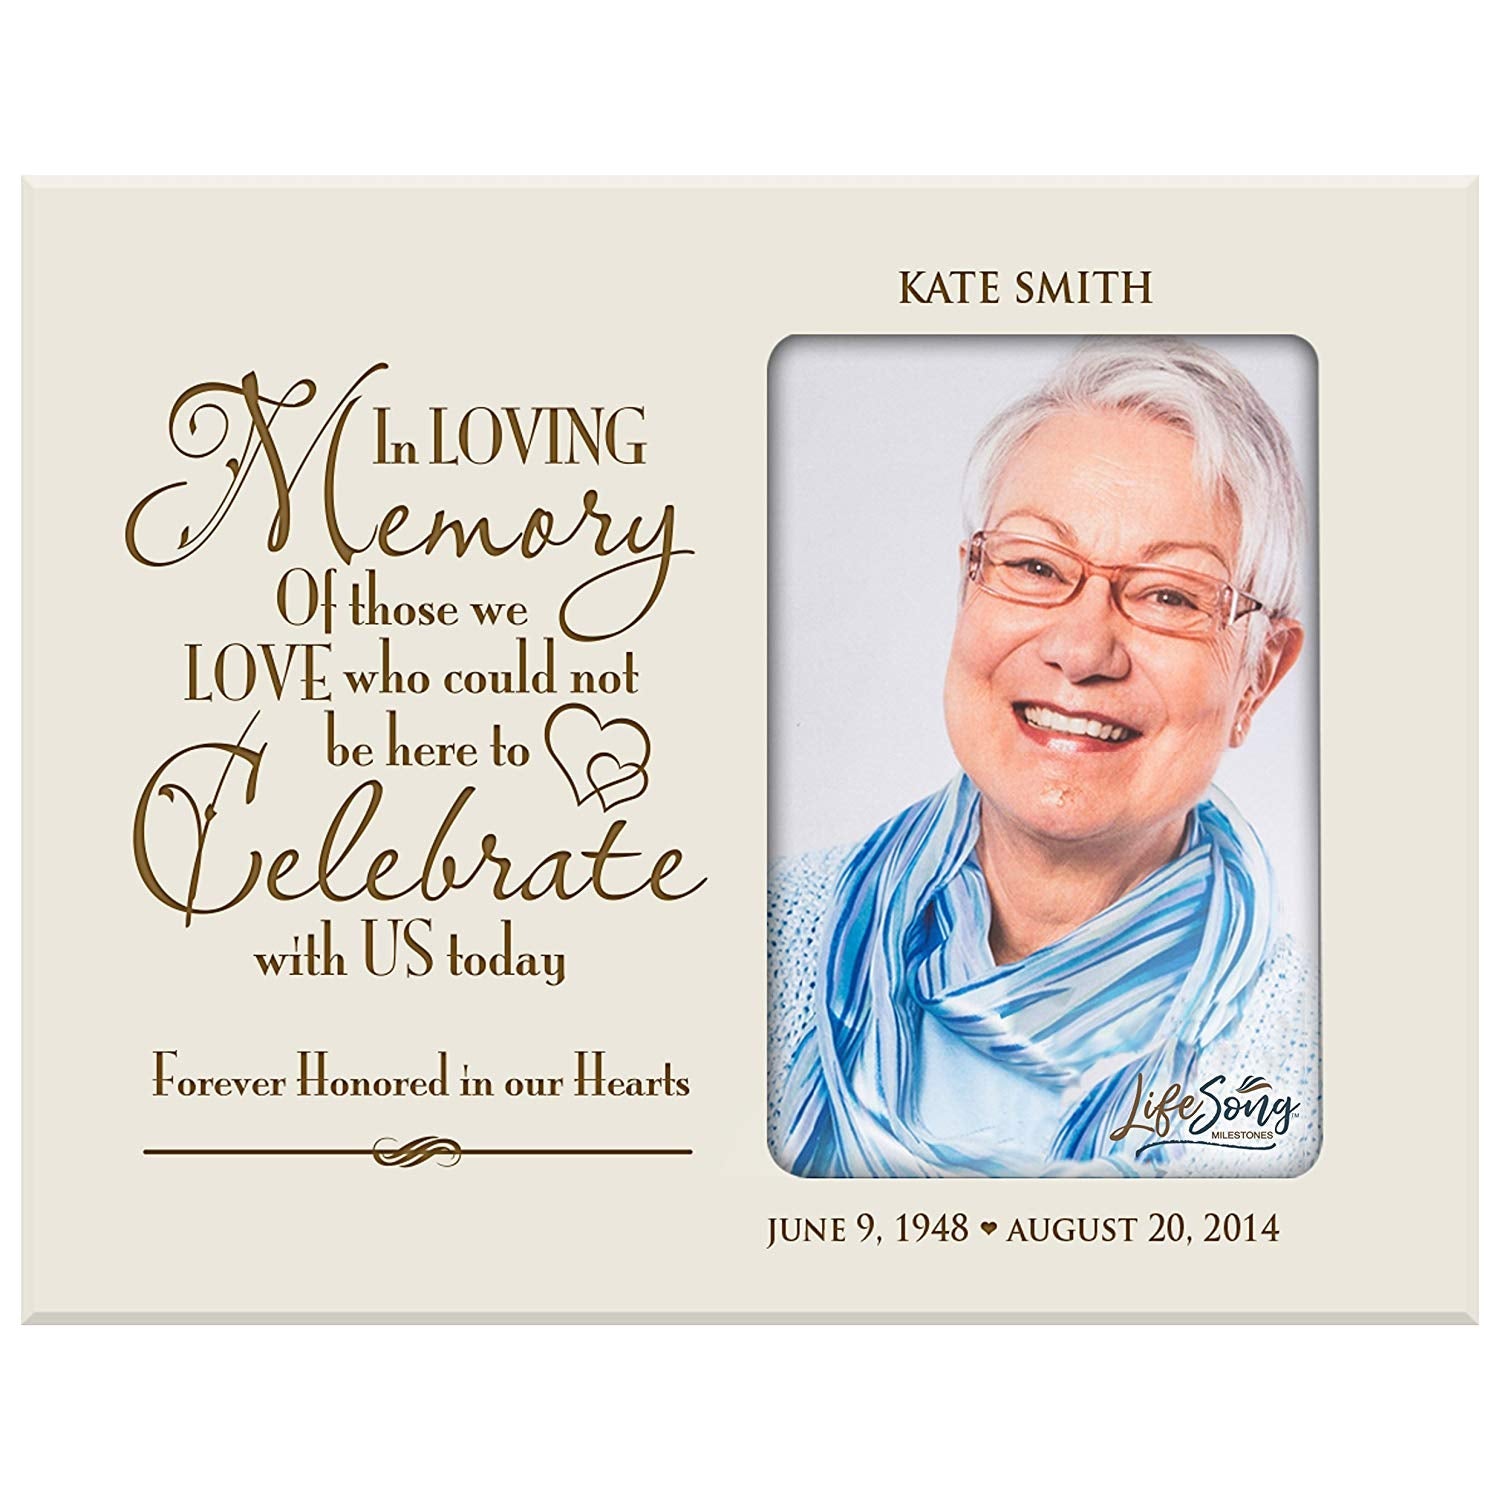 Personalized Wooden Memorial 8x10 Picture Frame holds 4x6 photo In Loving Memory - LifeSong Milestones